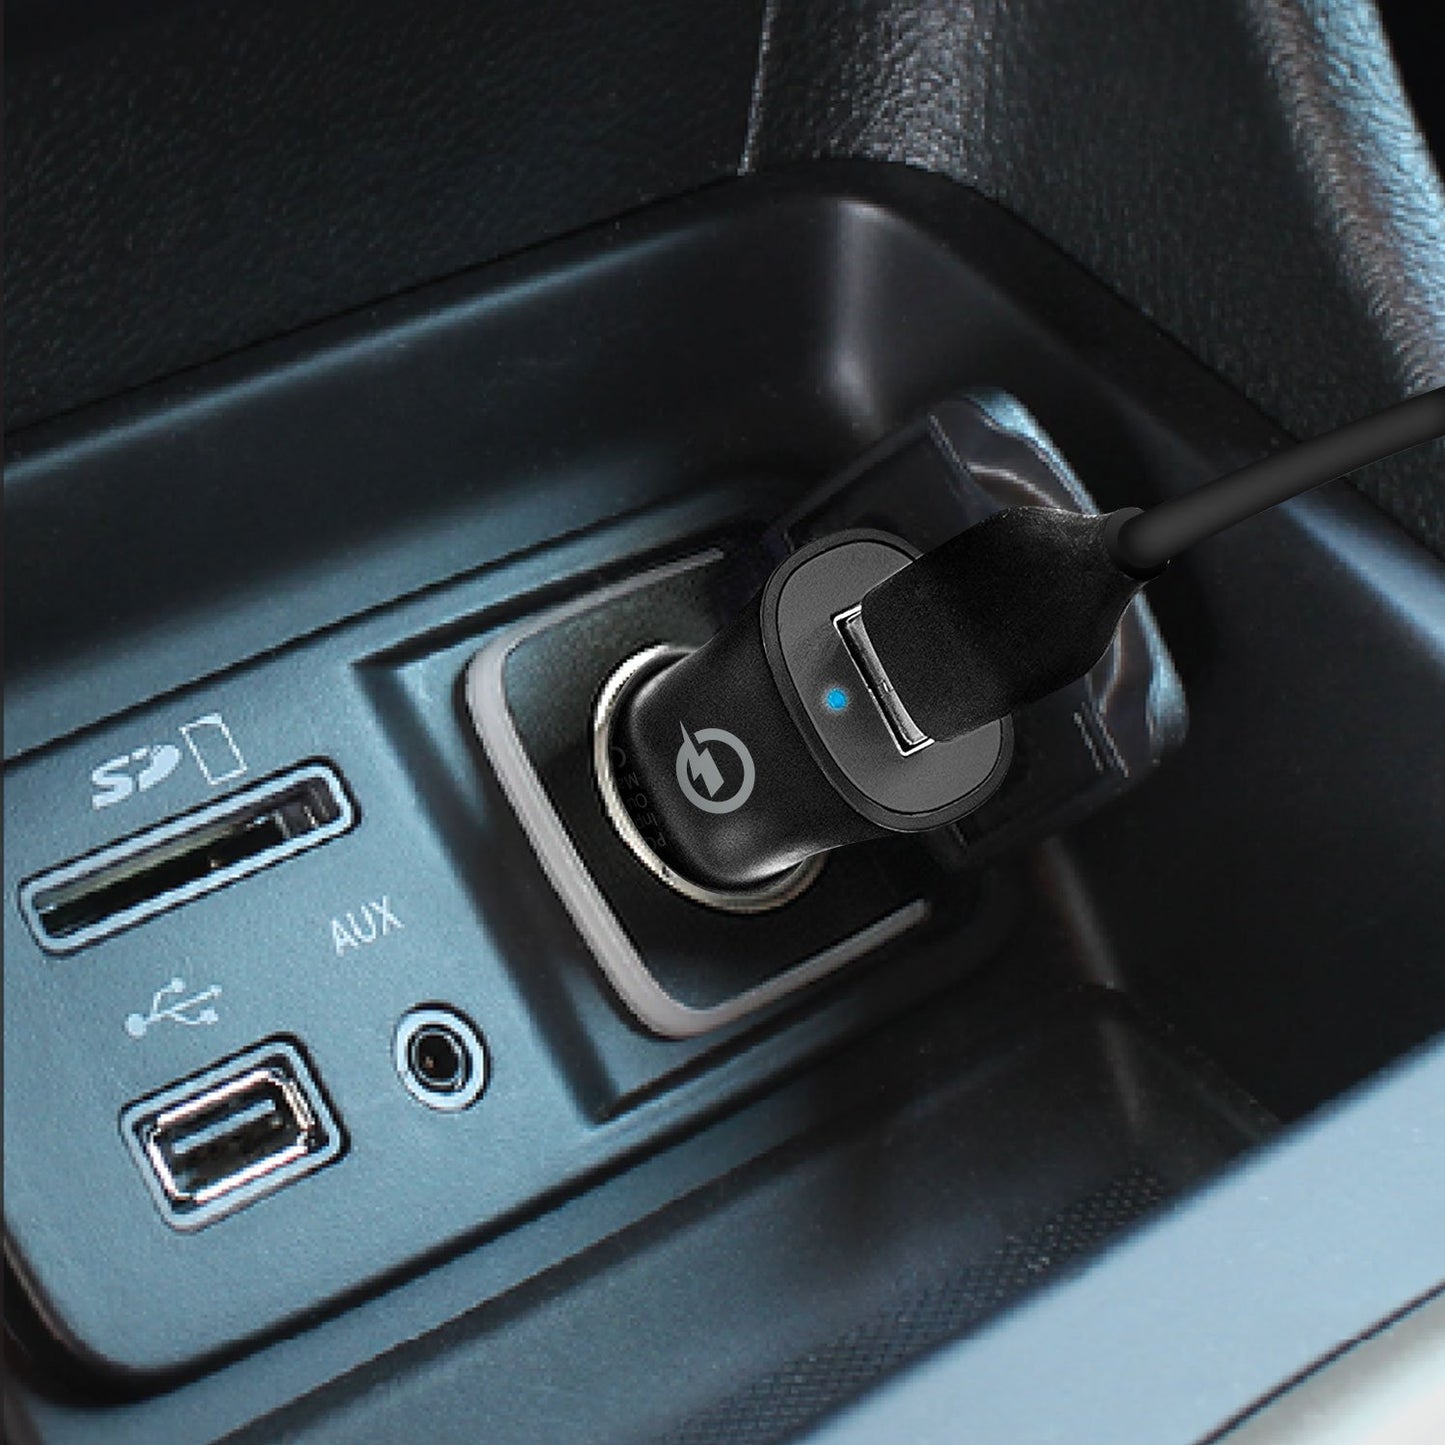 PQC30BK - Ultra Compact 3.0 Quick Charge USB Car Charger - Black